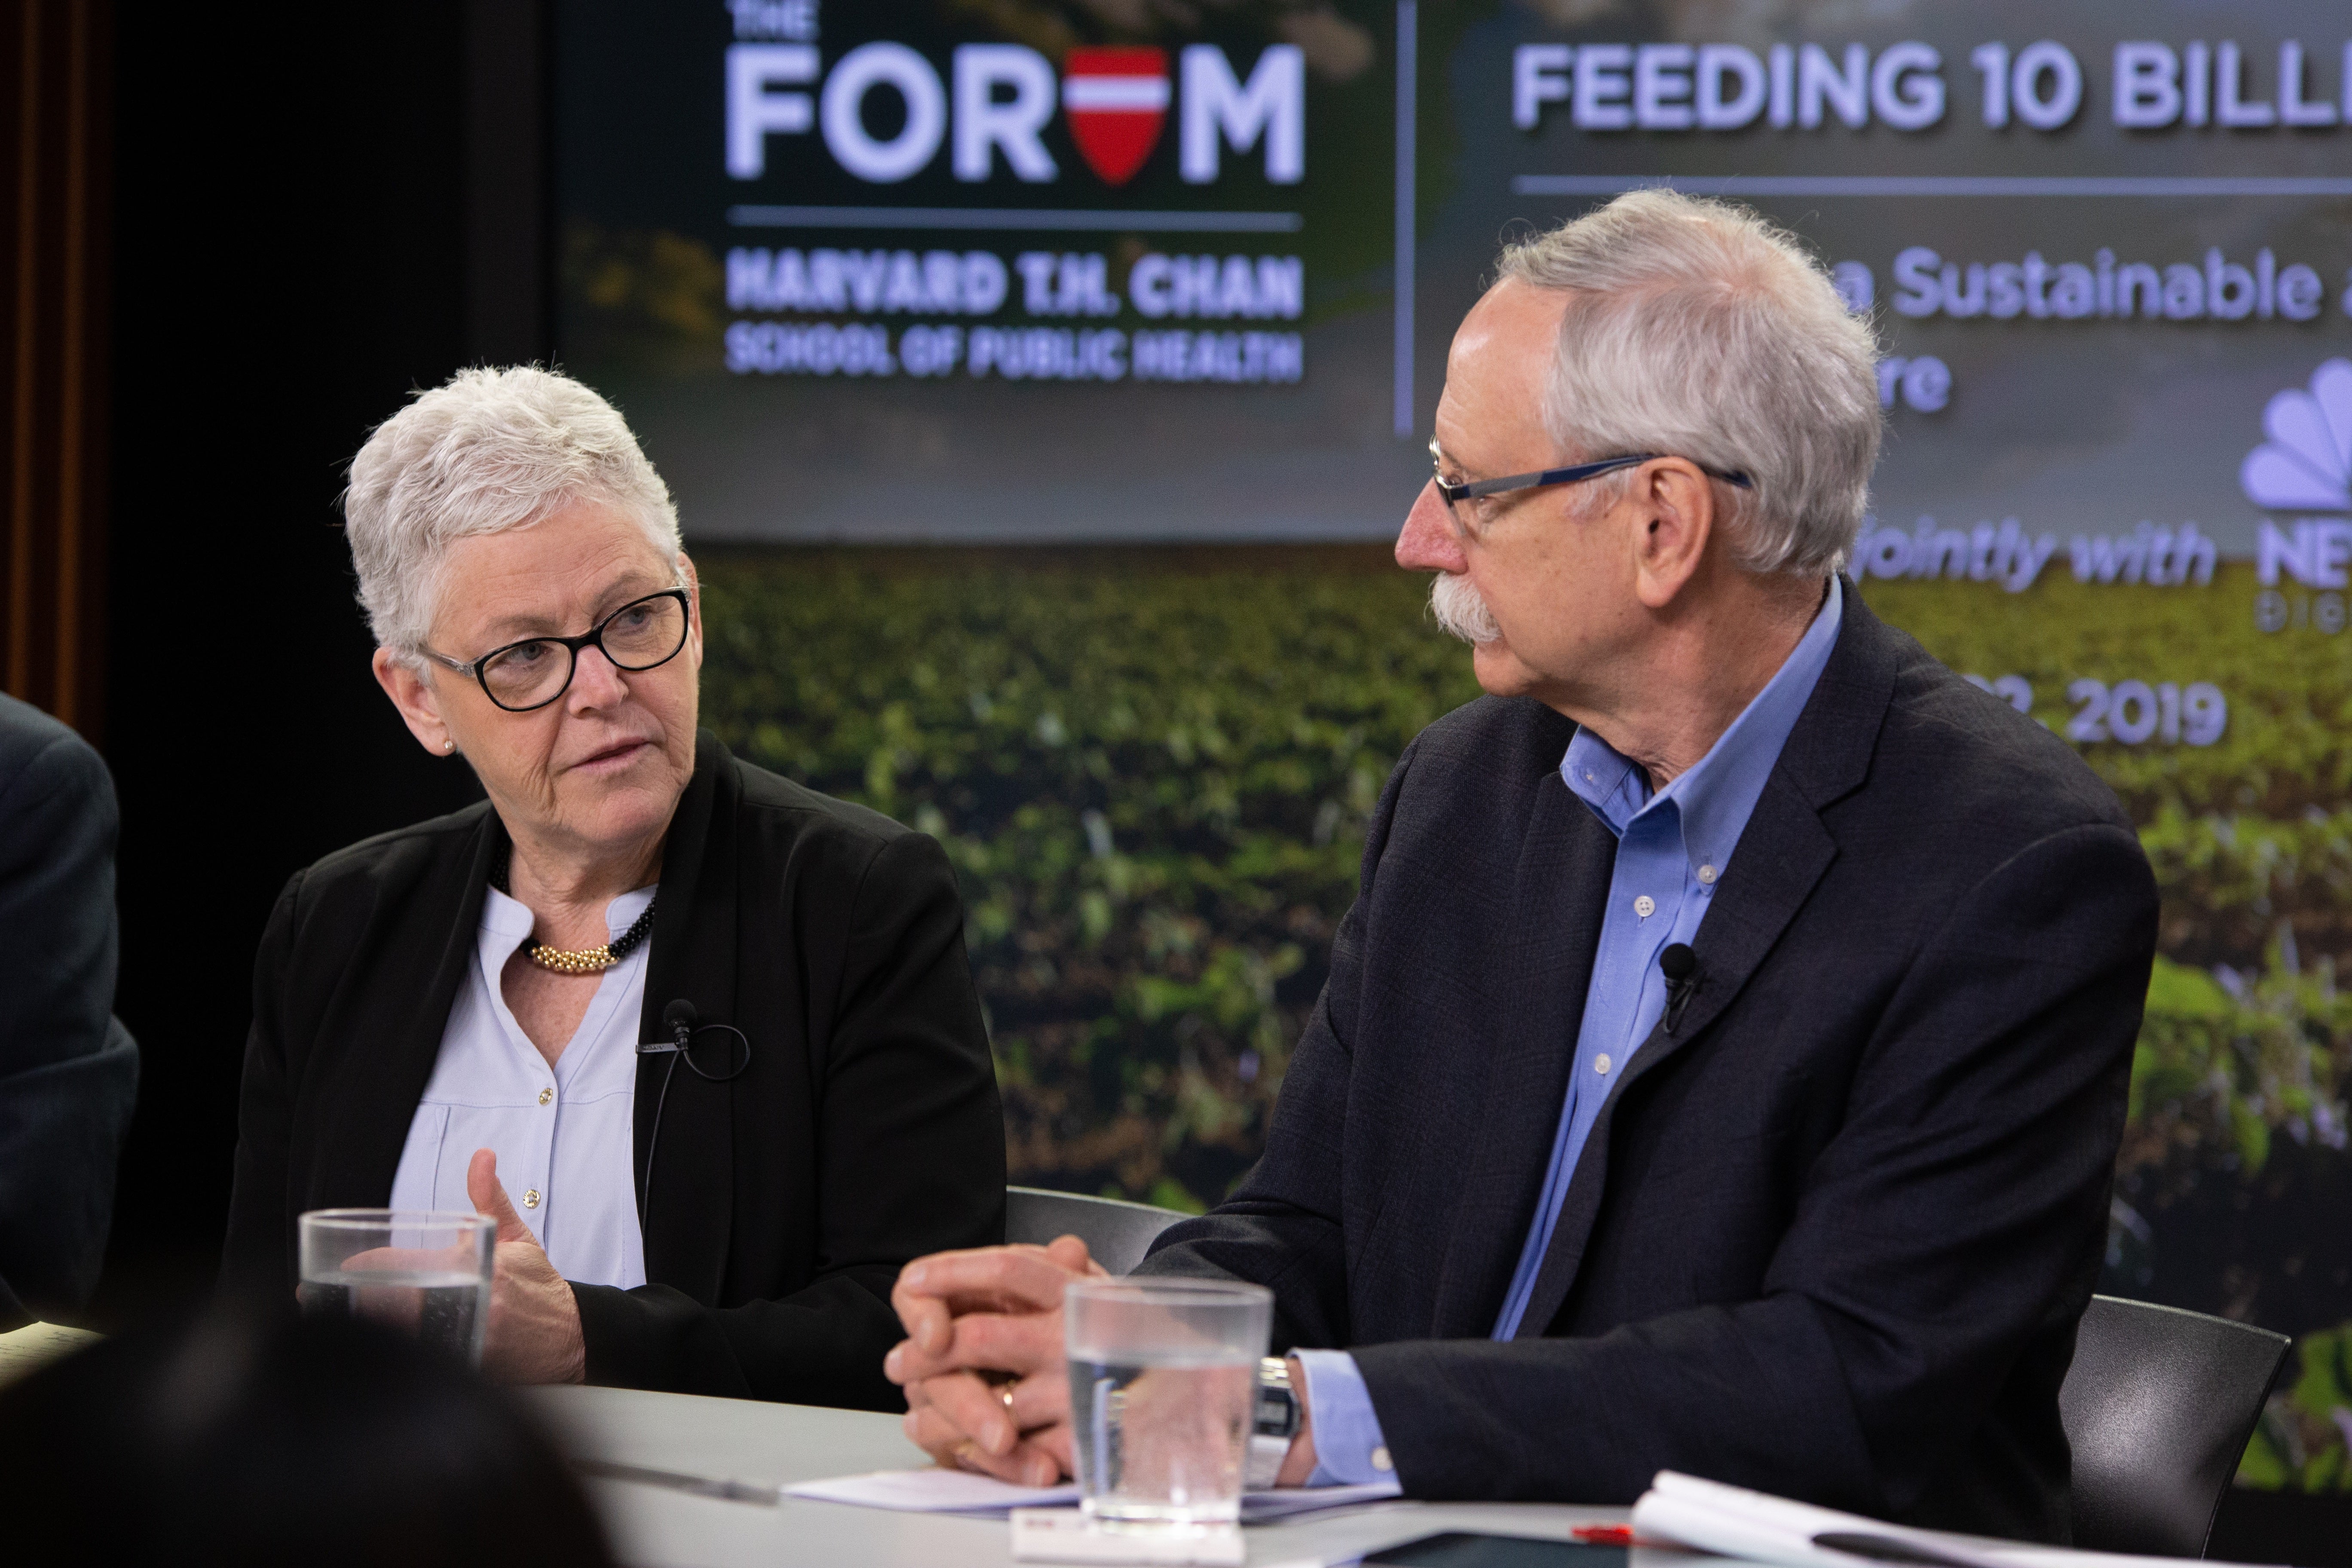 Gina McCarthy, 13th Administrator of the EPA; Professor of the Practice of Public Health in the Department of Environmental Health at Harvard T.H. Chan School of Public Health and Director of the Center for Climate, Health, and the Global Environment; Walter Willett, Professor of Epidemiology and Nutrition, Harvard T.H. Chan School of Public Health